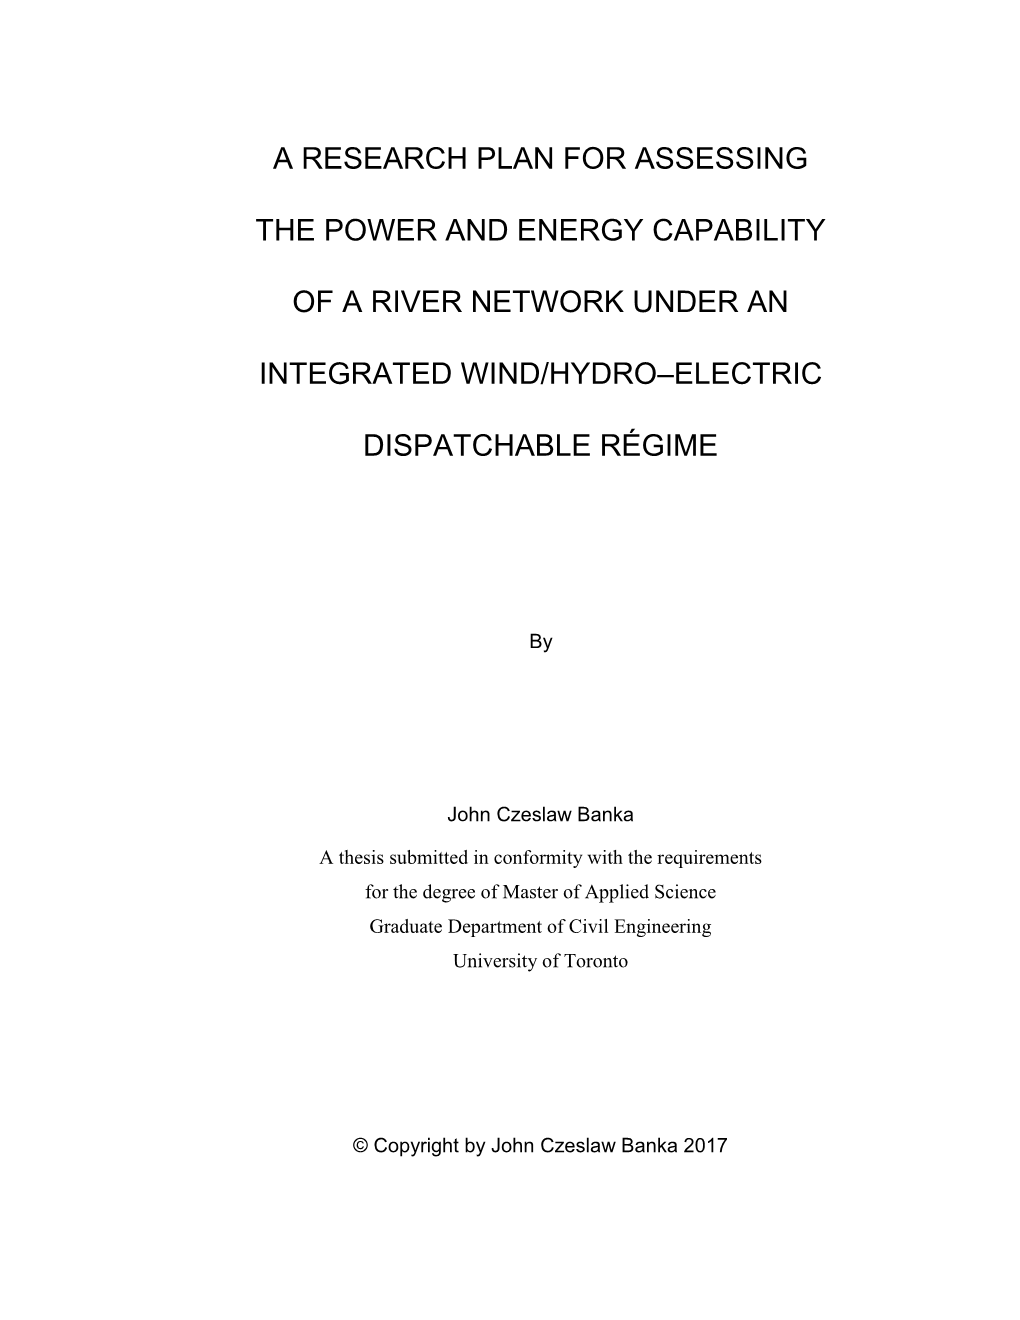 A Research Plan for Assessing the Power and Energy Capability of a River Network Under an Integrated Wind/Hydro–Electric Dispatchable Régime